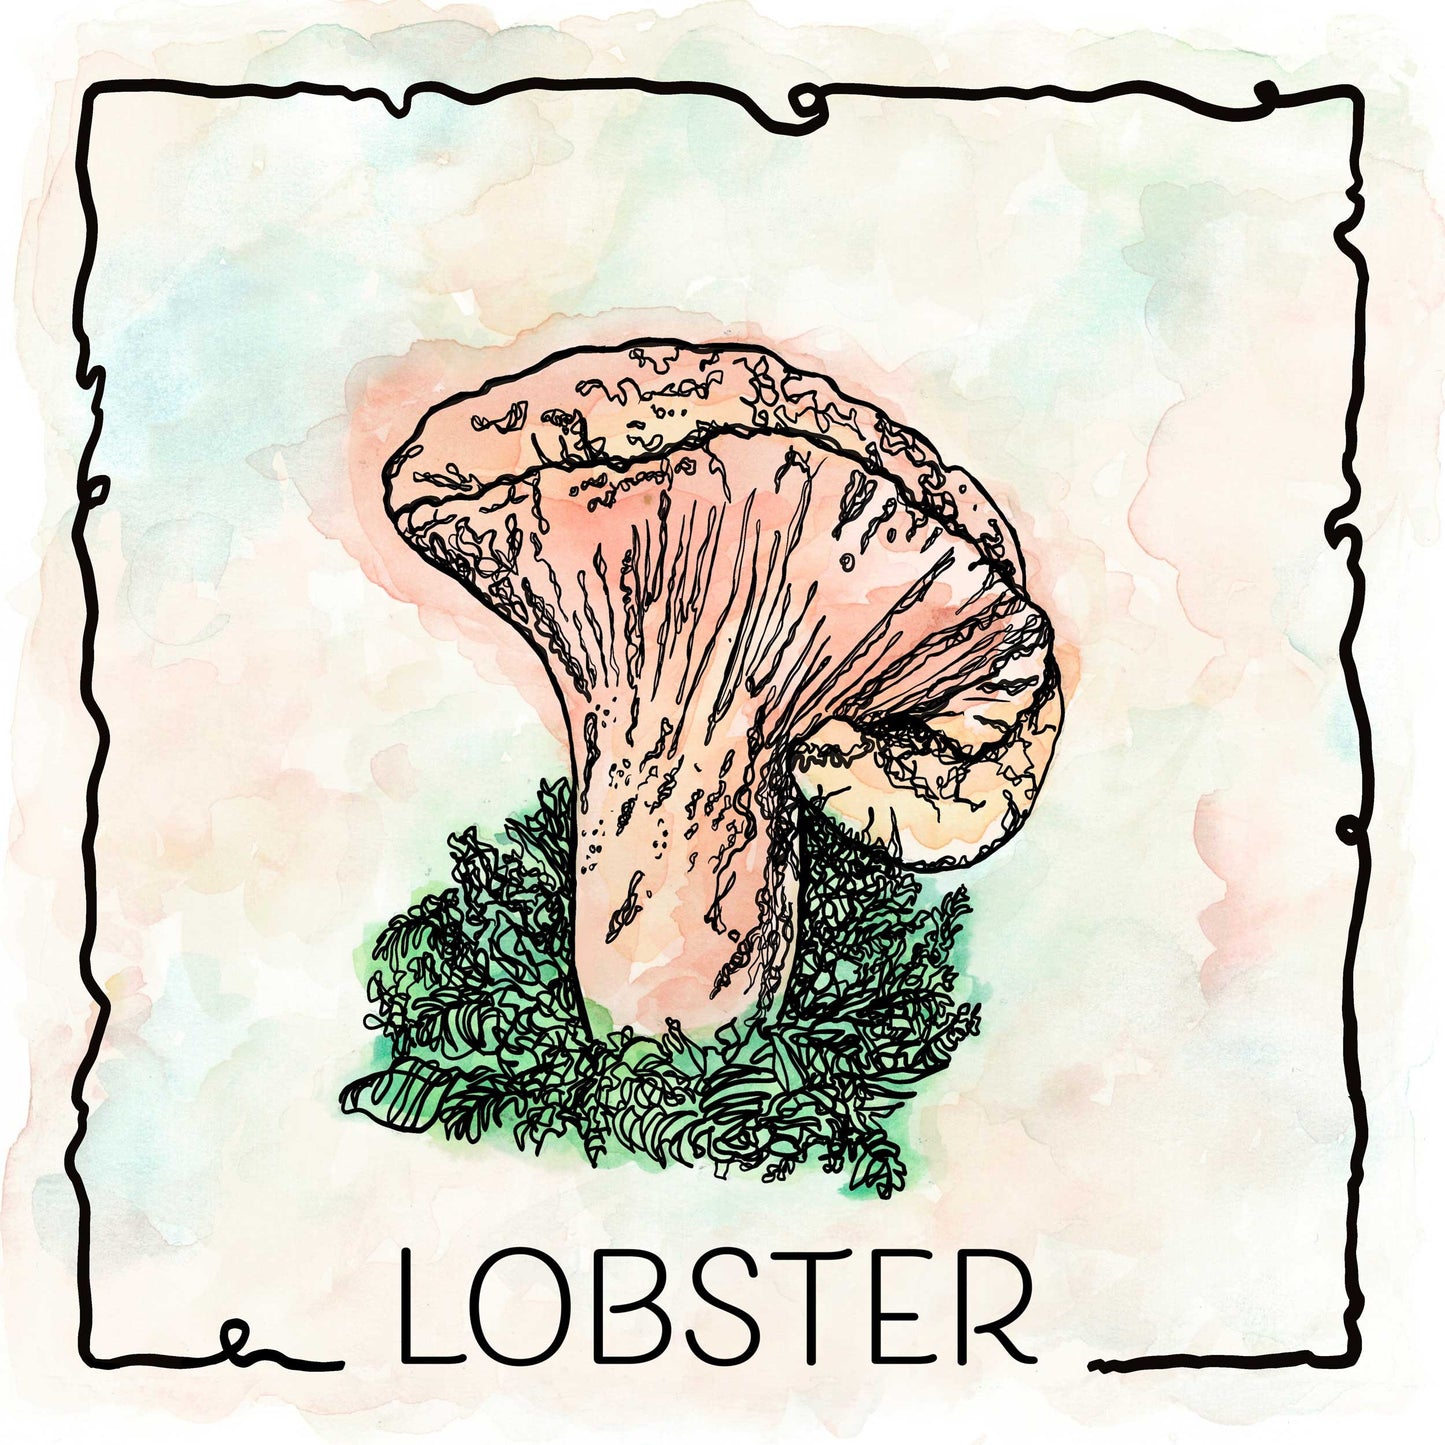 Edible and Beautiful | 4 Prized Wild Mushrooms | Set of Four 5"x5" Prints | Chanterelle, Lobster, Morel and Oyster